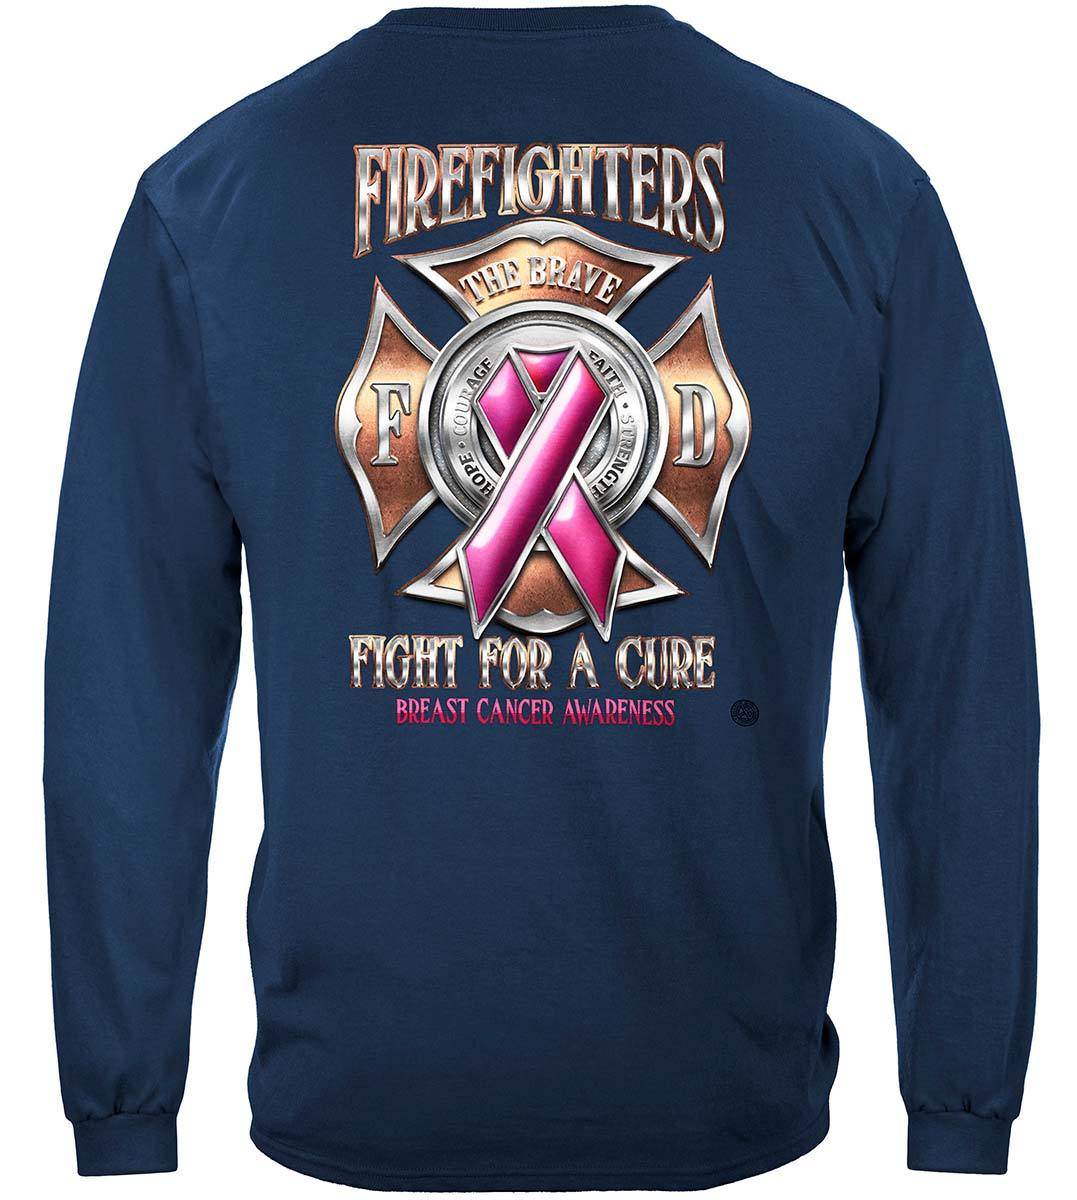 Firefighter Race For A Cure Premium T-Shirt